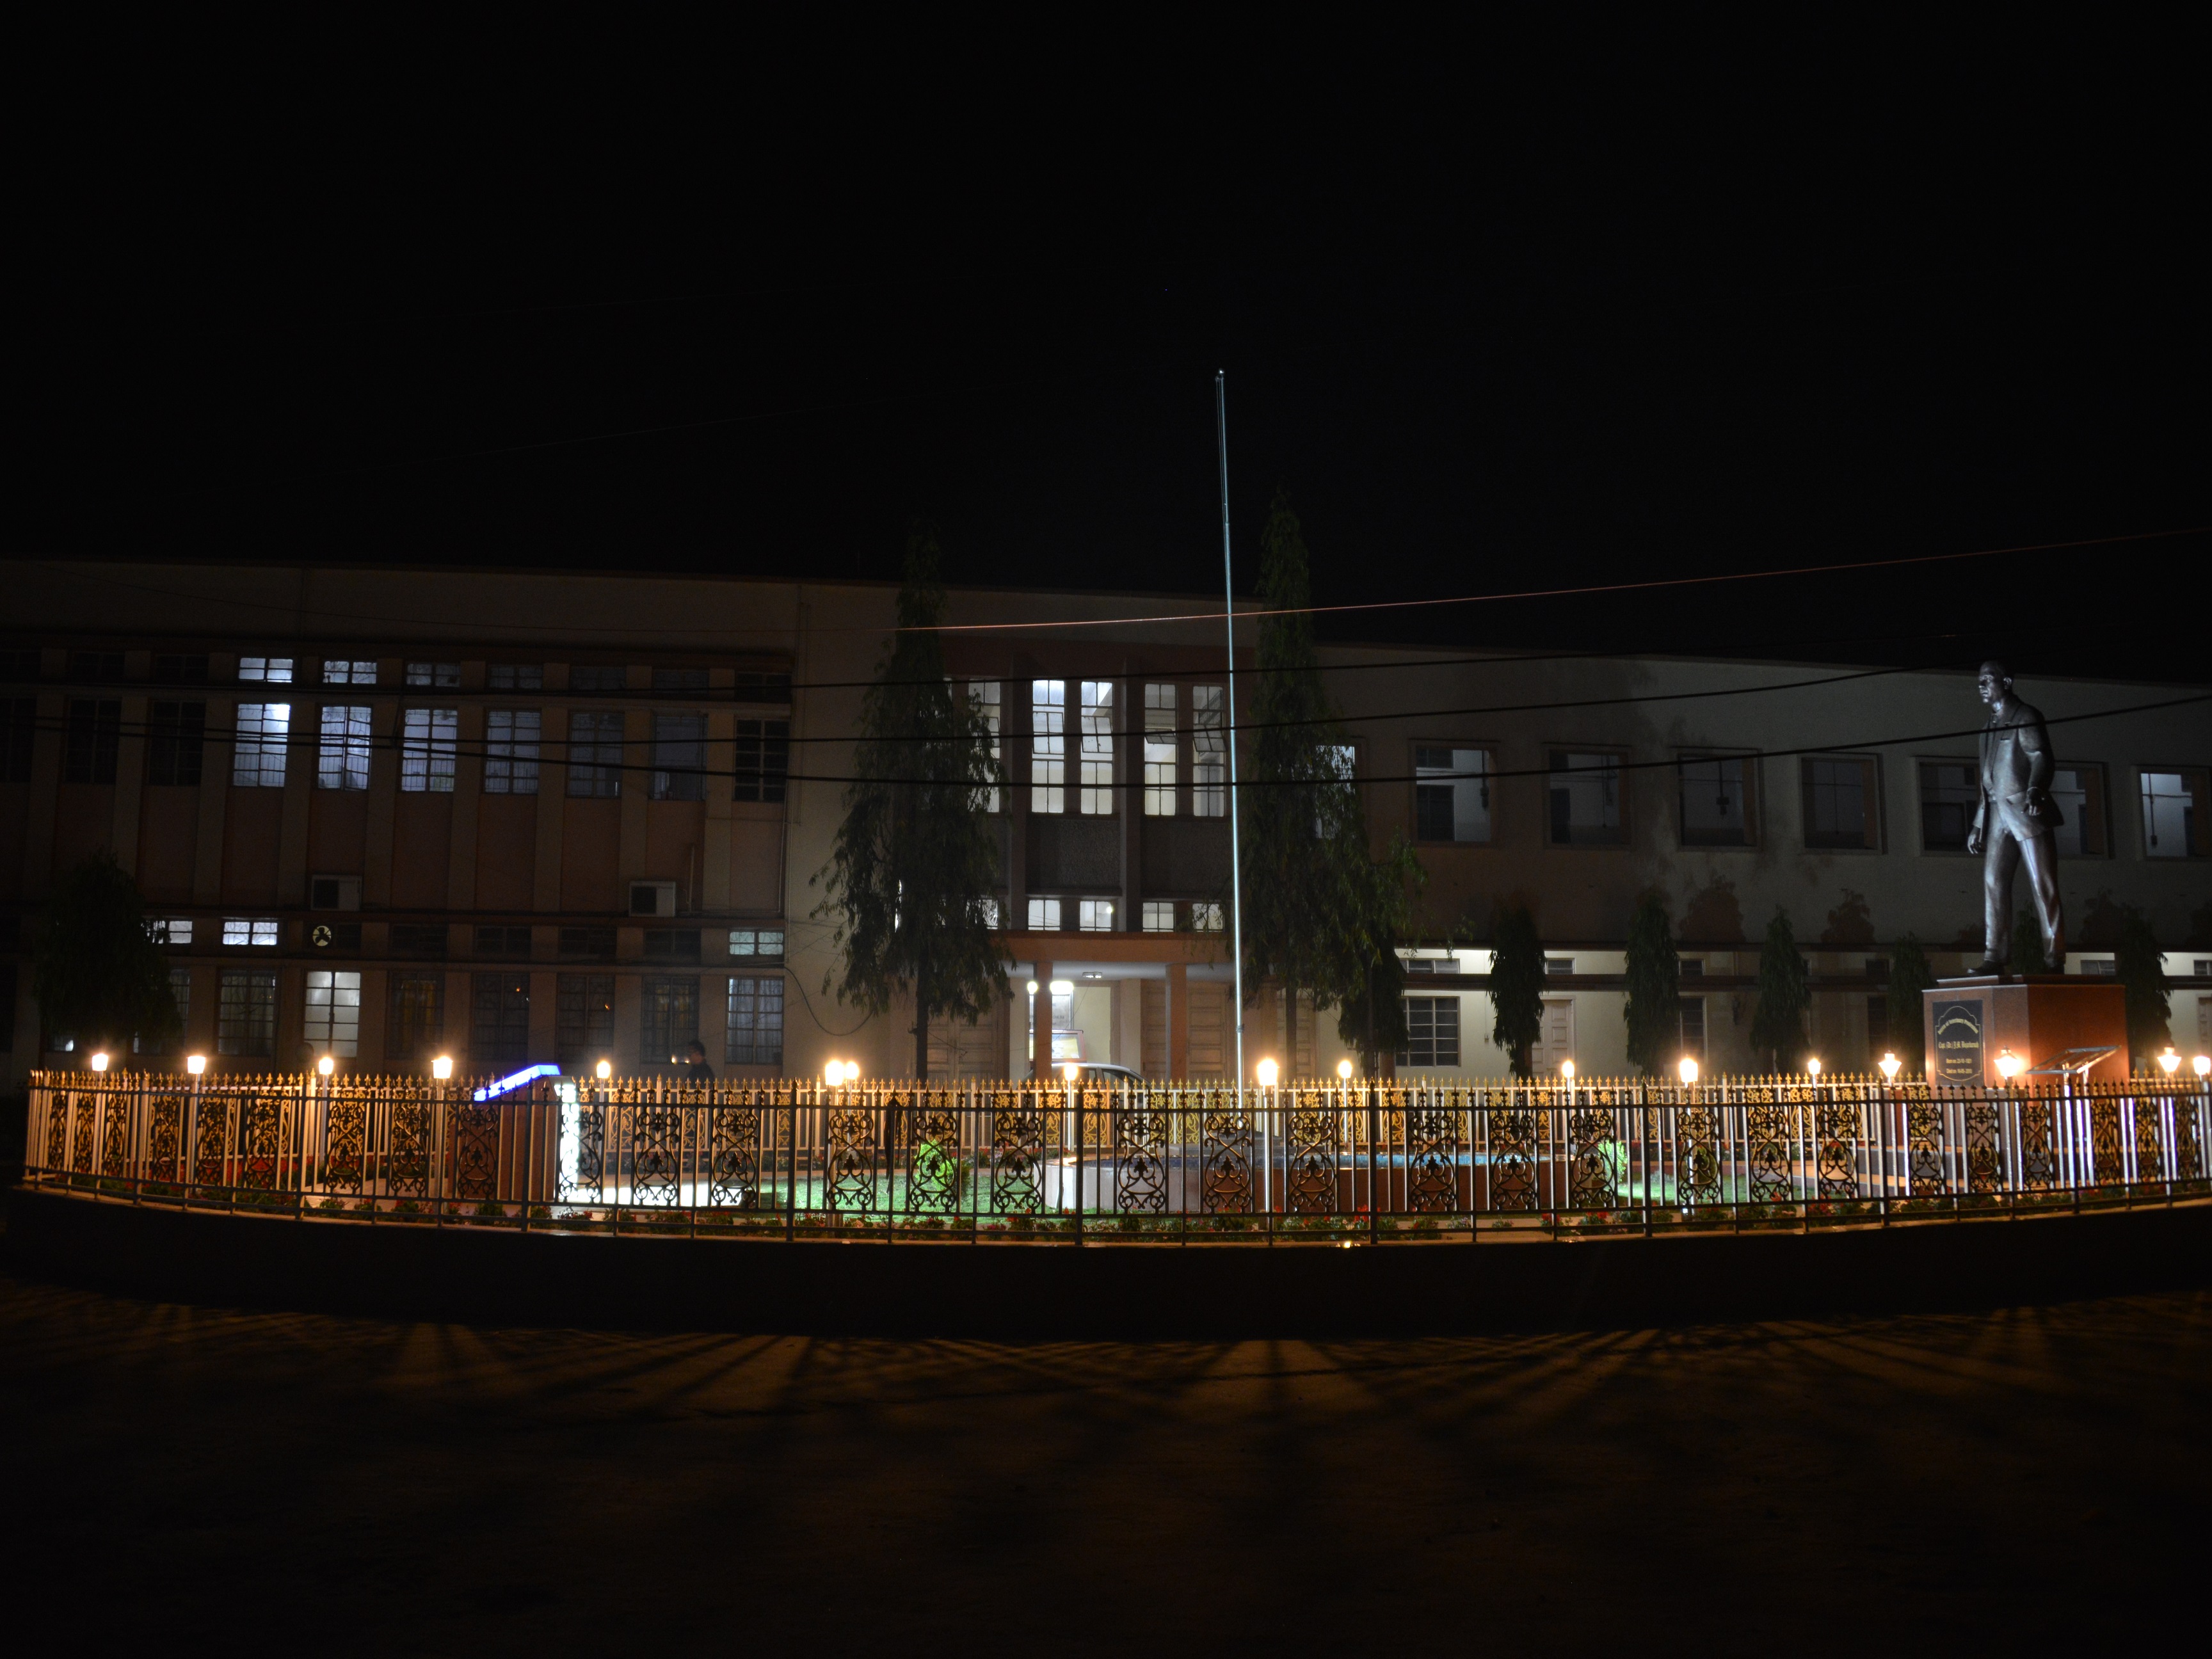 College of Veterinary Science